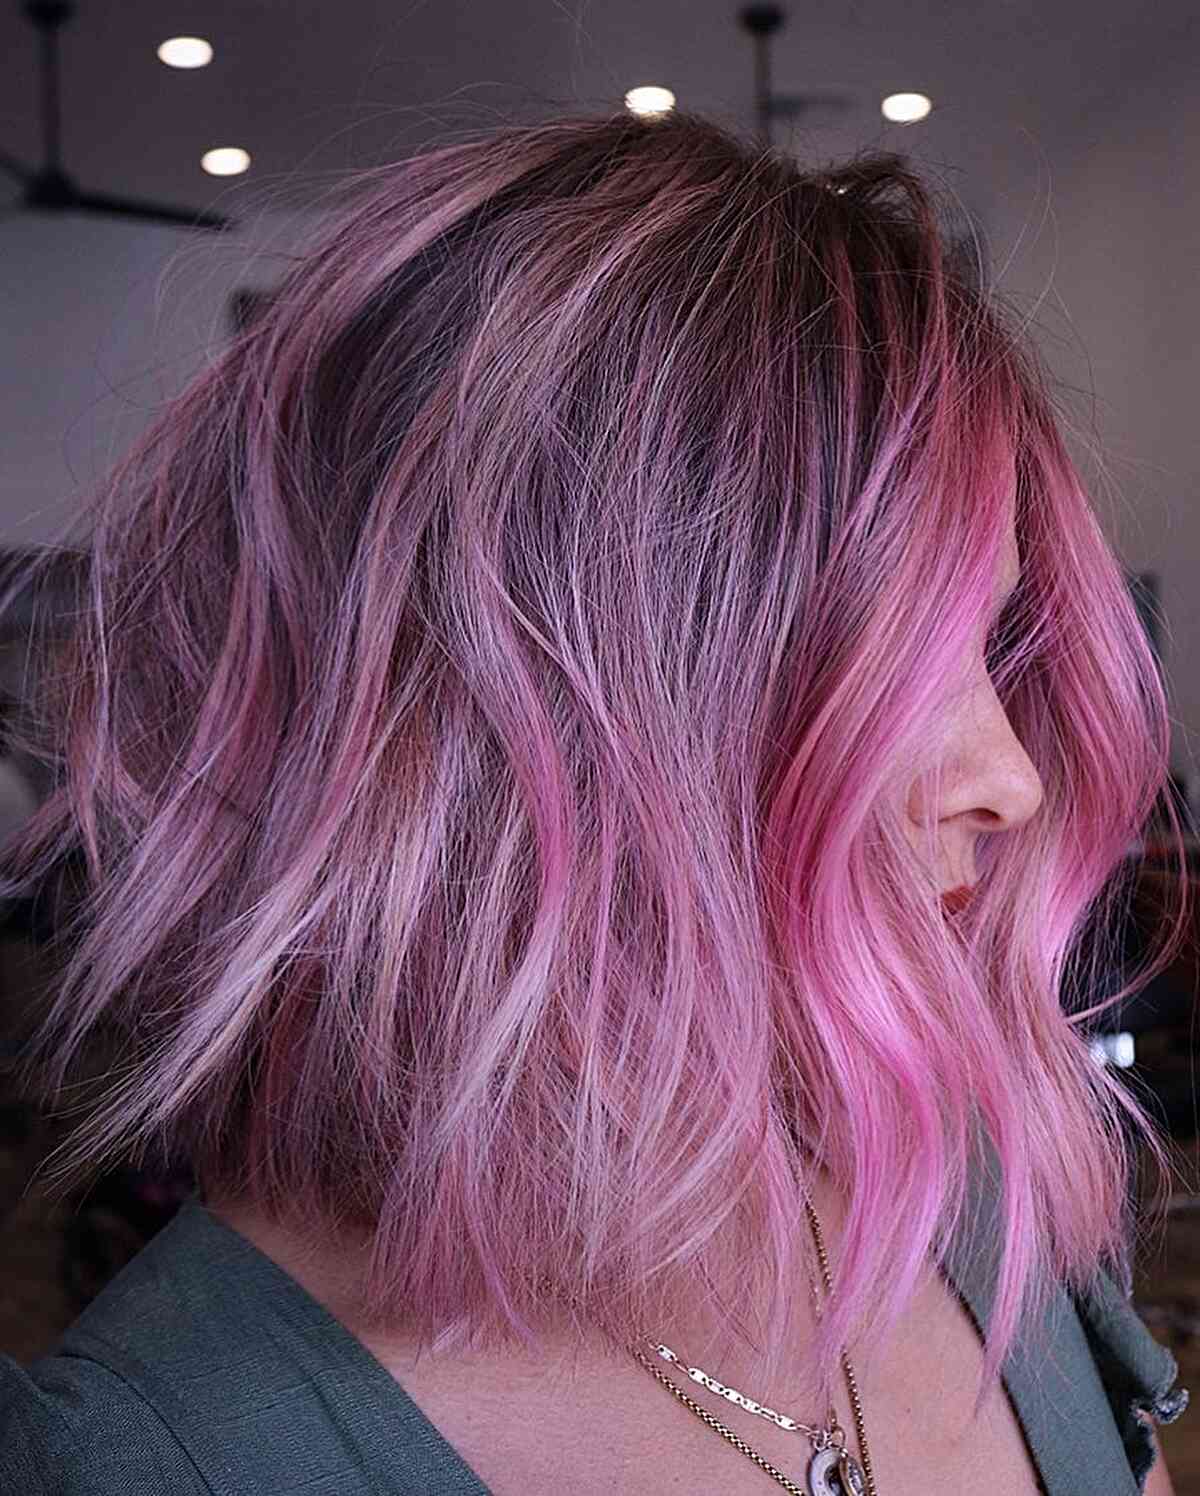 Barbie Pink Balayage Hair for girls with mid-length wavy hair